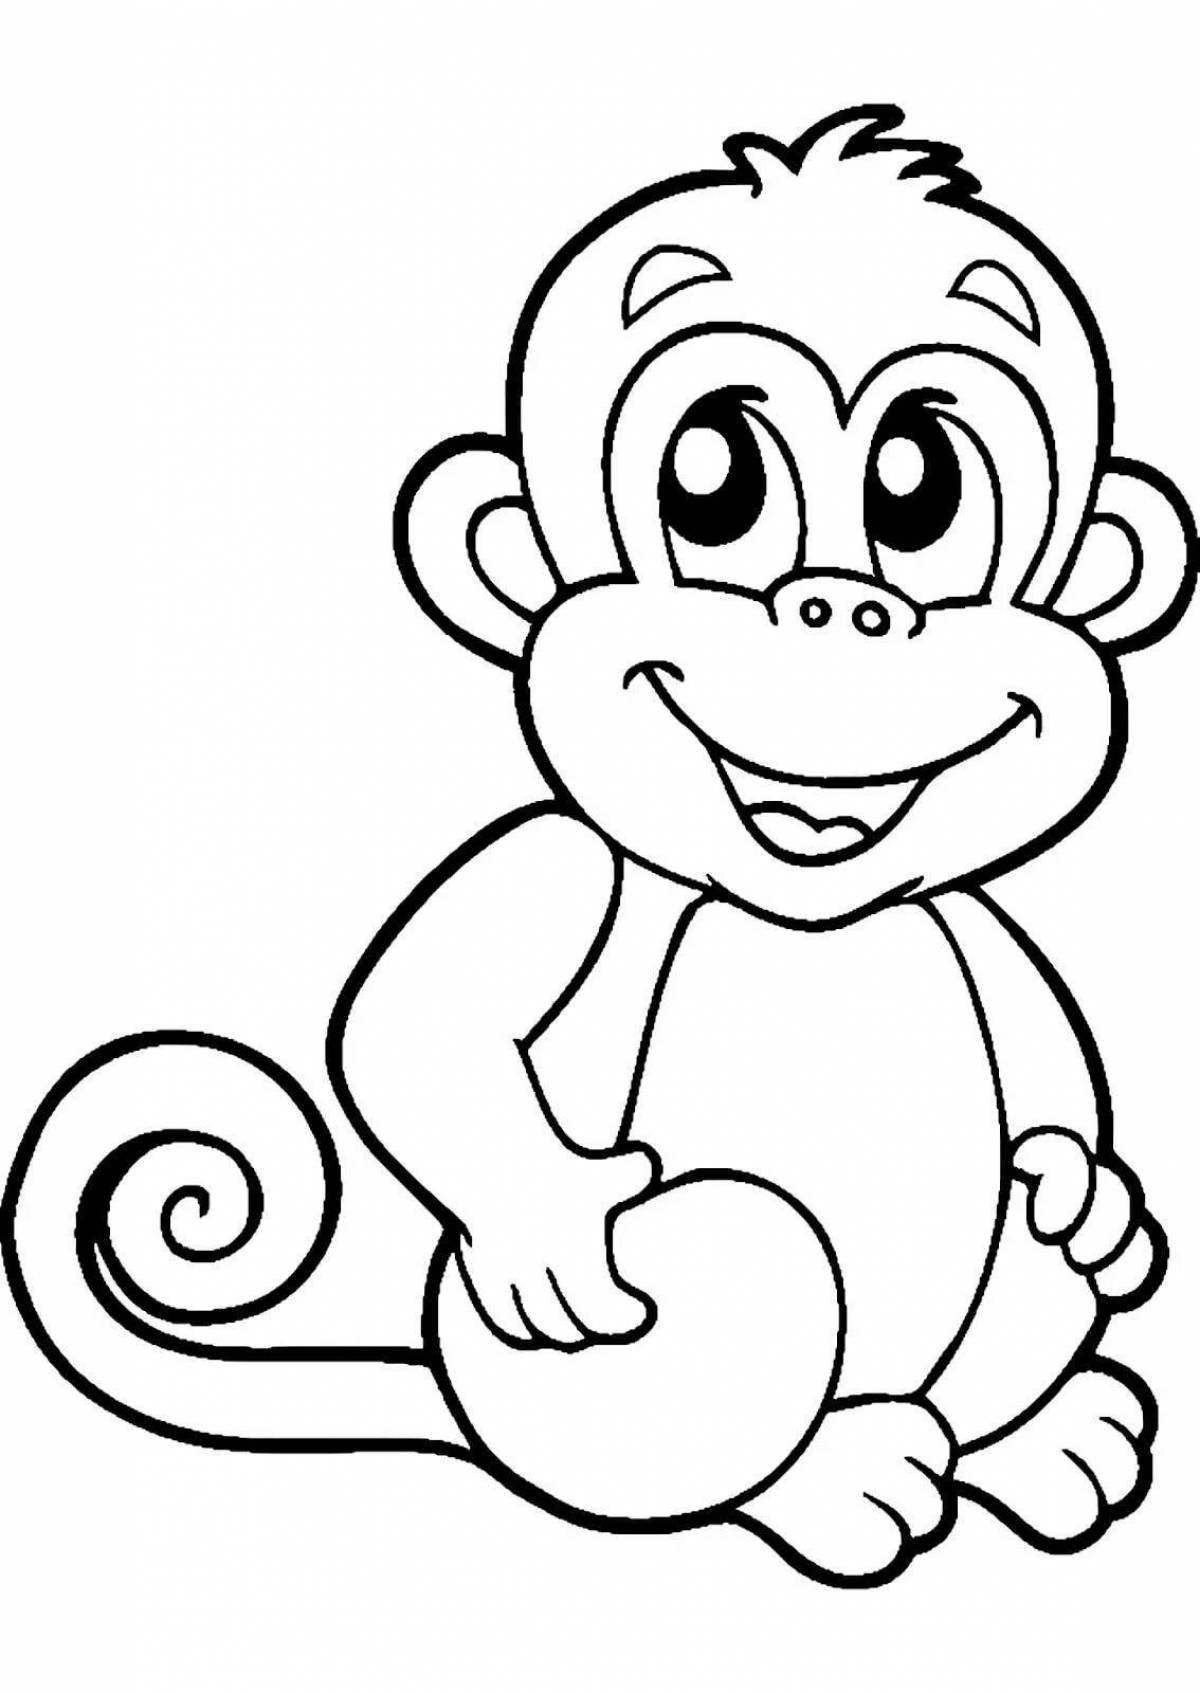 Radiant toque coloring page